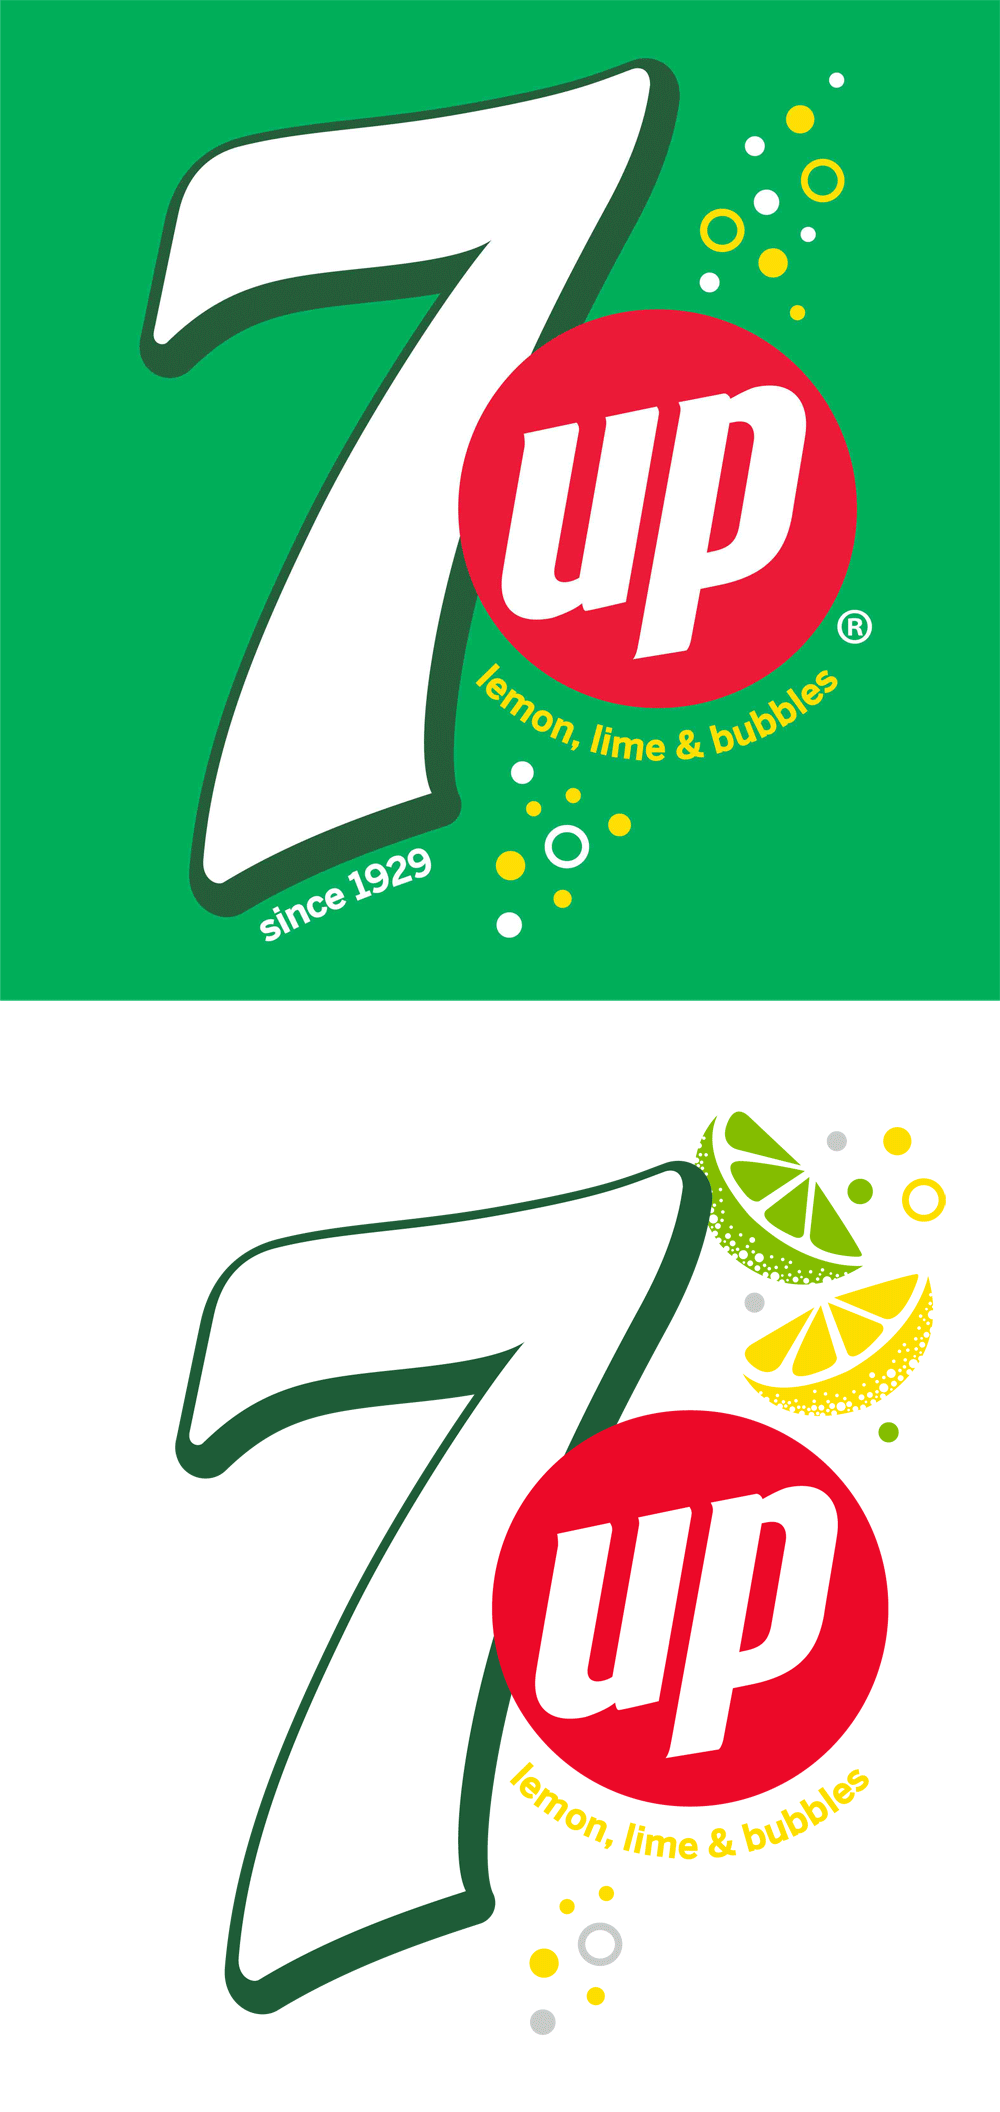 Seven Up Logo - Brand New: New Logo and Packaging for PepsiCo's 7up